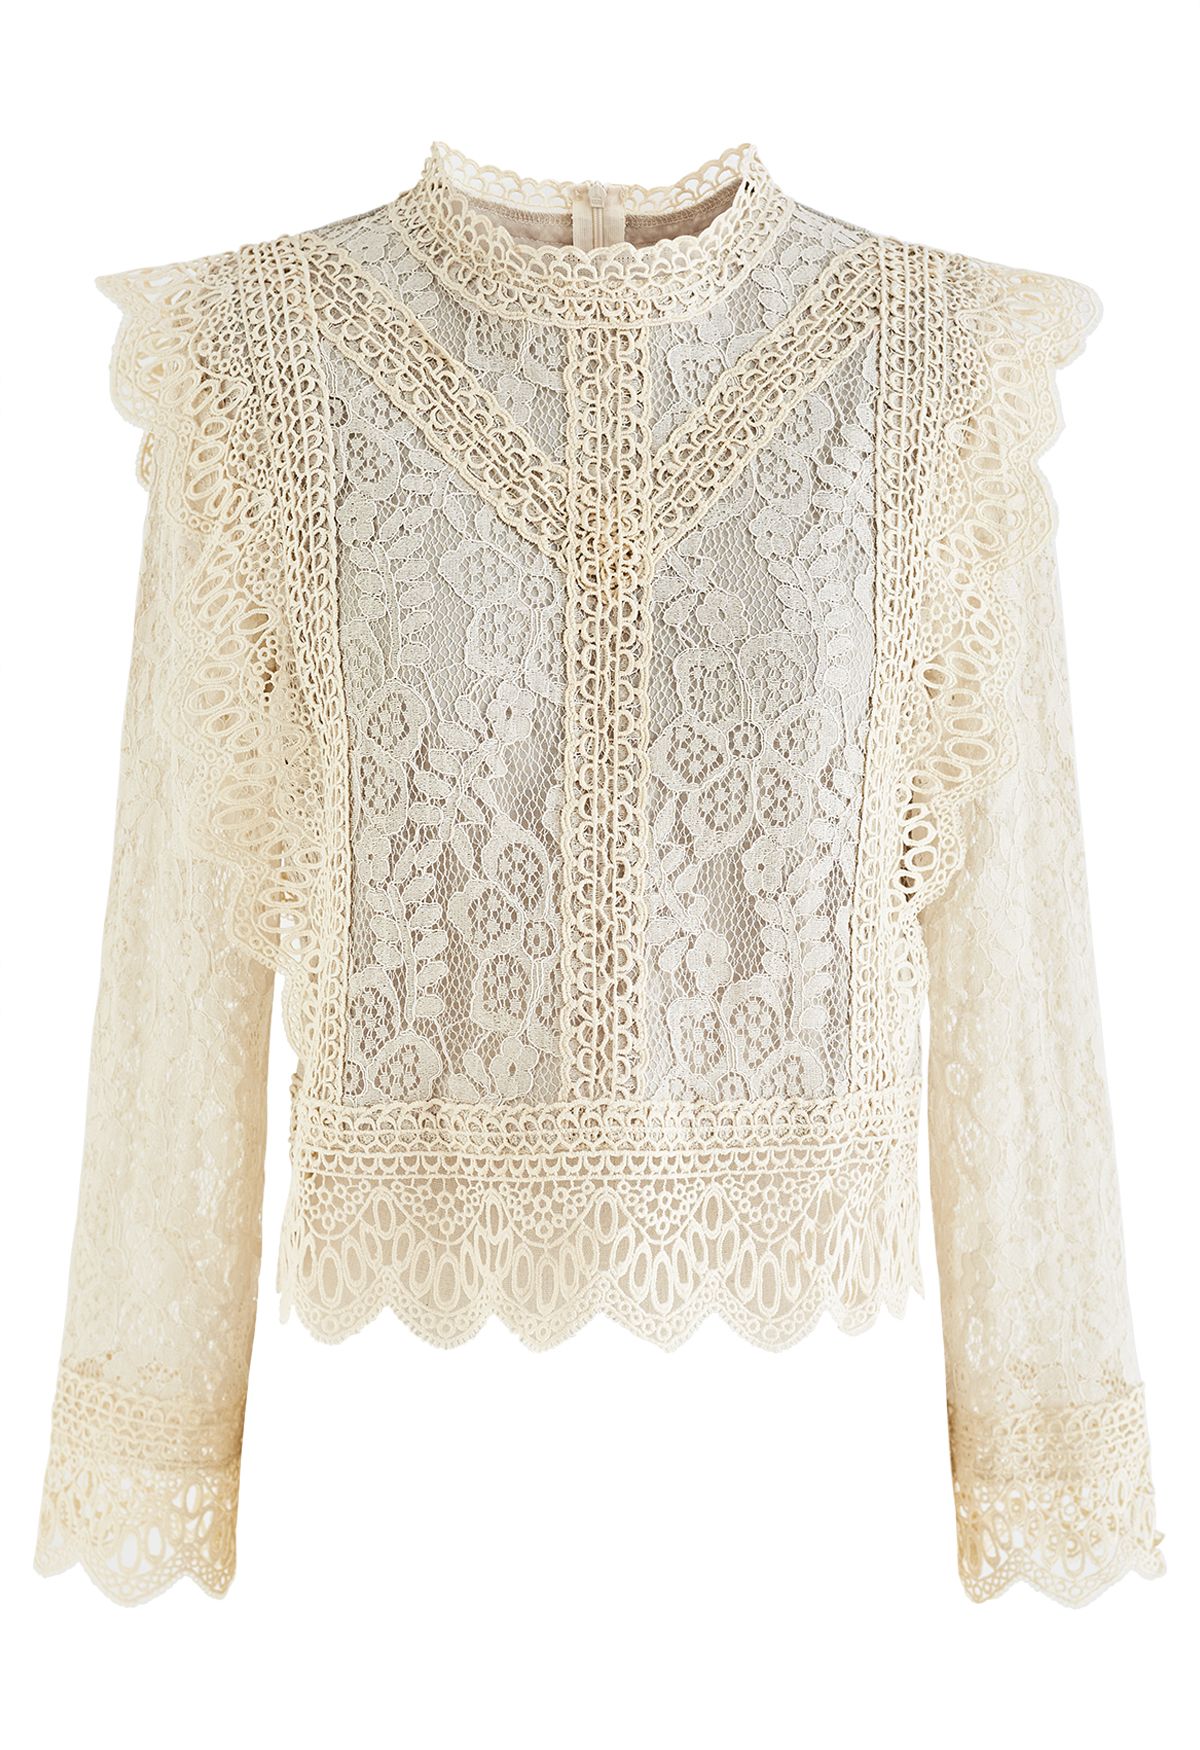 Your Sassy Start Long Sleeve Crochet Lace Top in Cream - Retro